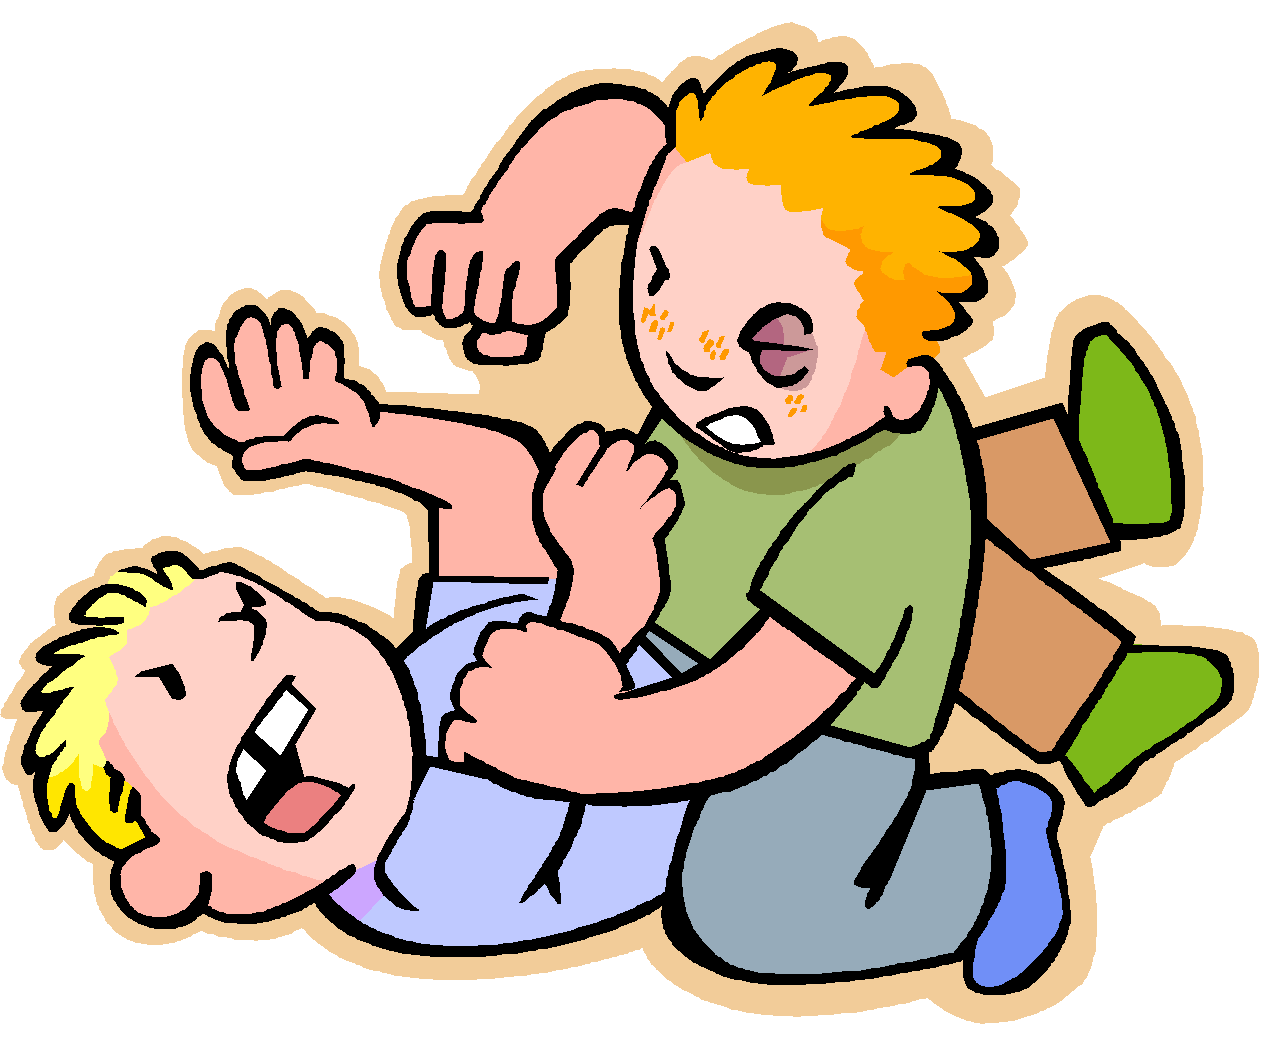 Conflict clipart family fight, Picture #782227 conflict.